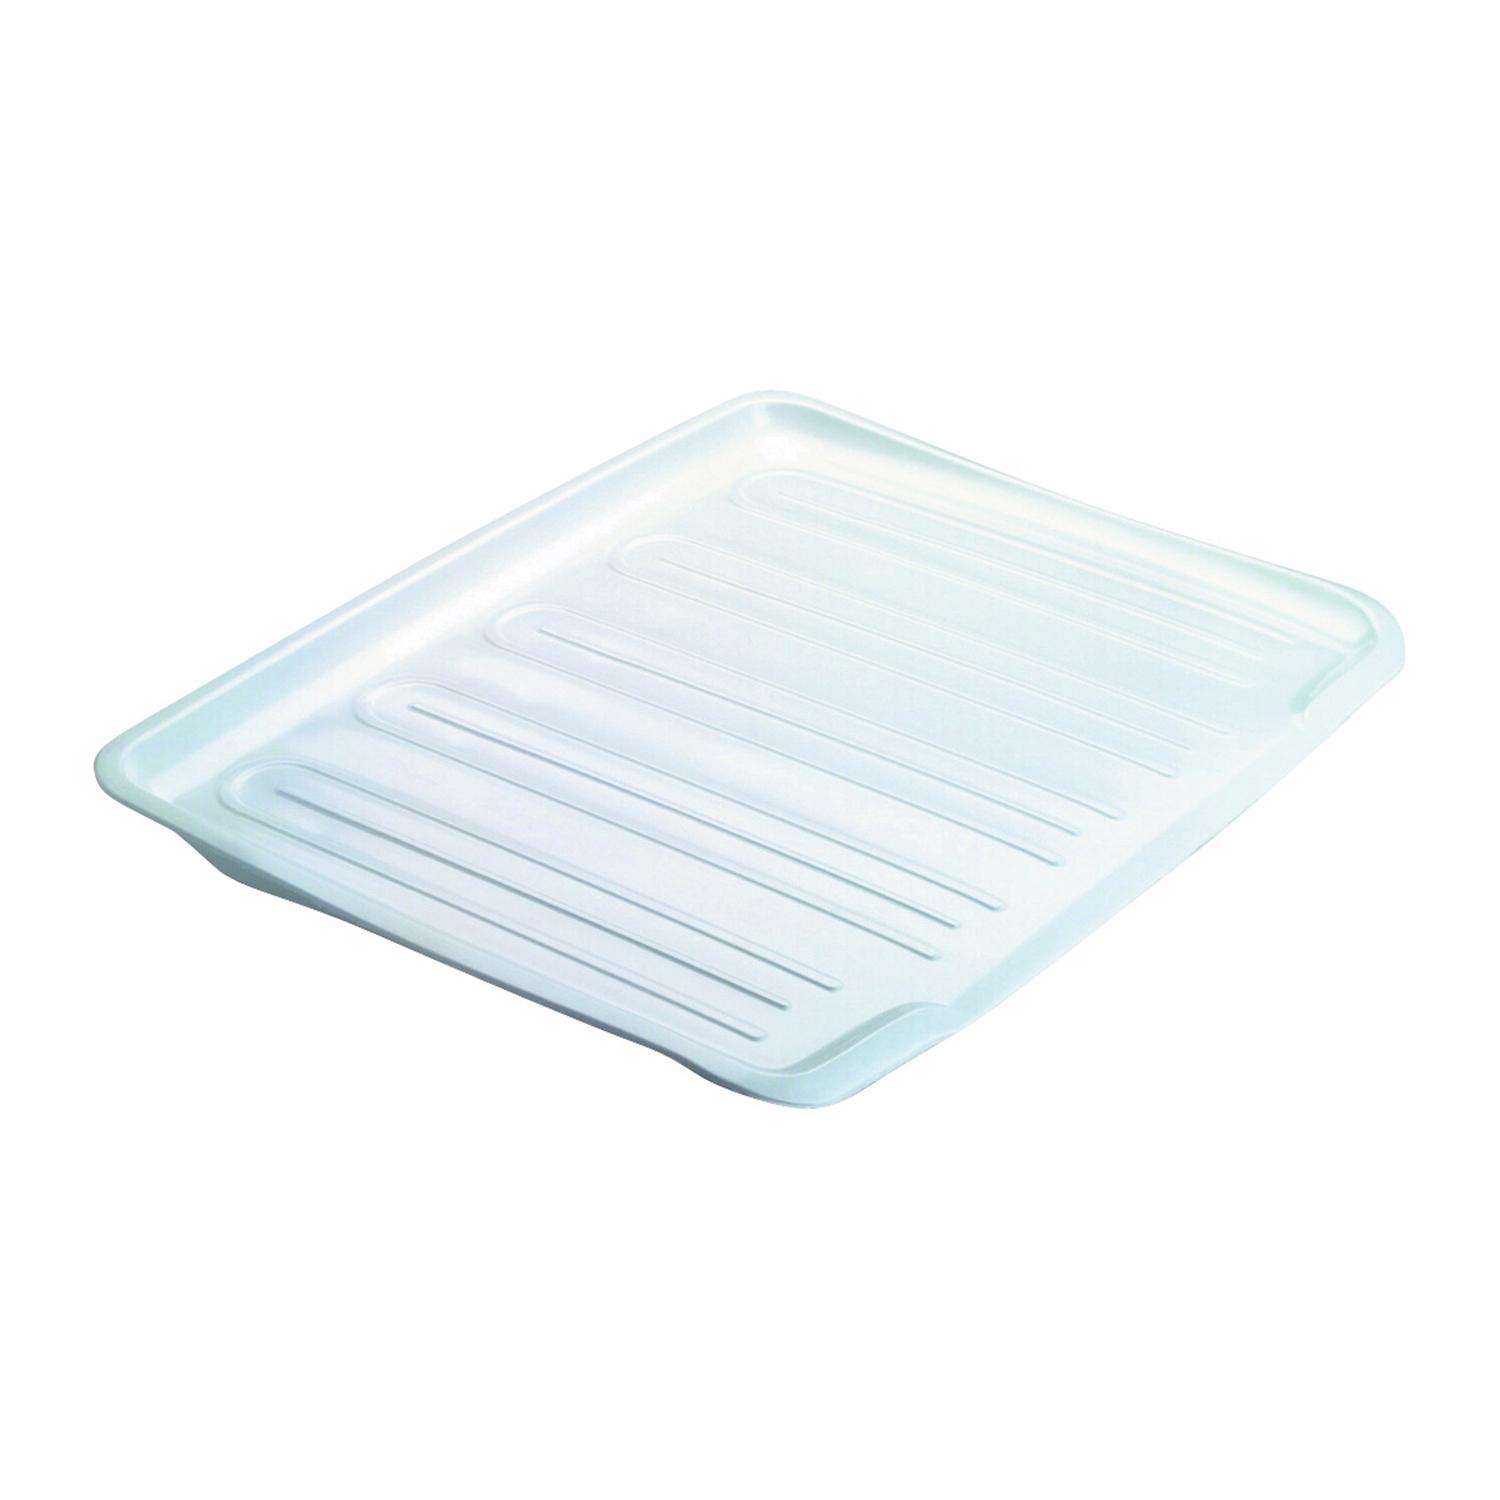 Rubbermaid Food Products Rubbermaid, Large, White For Dish Drainer